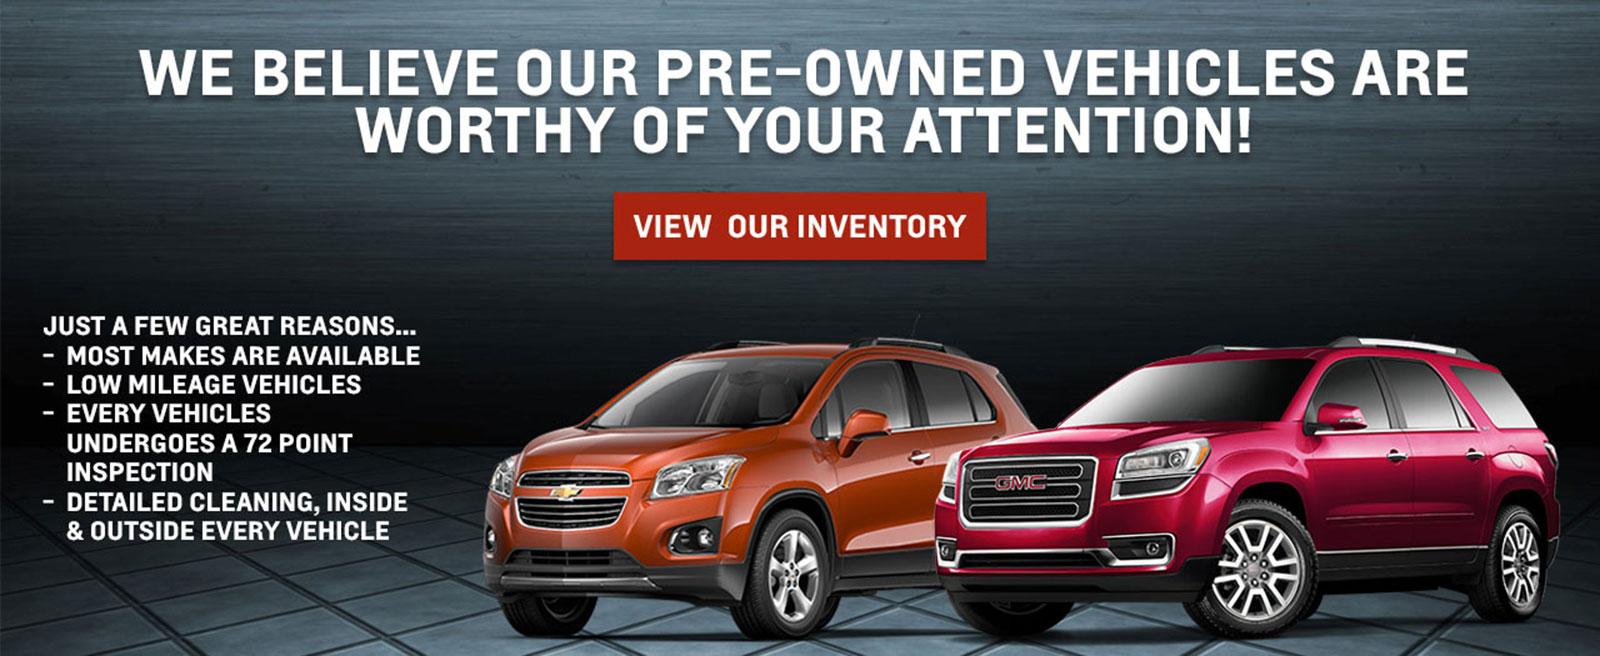 View Our Inventory of Pre-Owned Vehicles